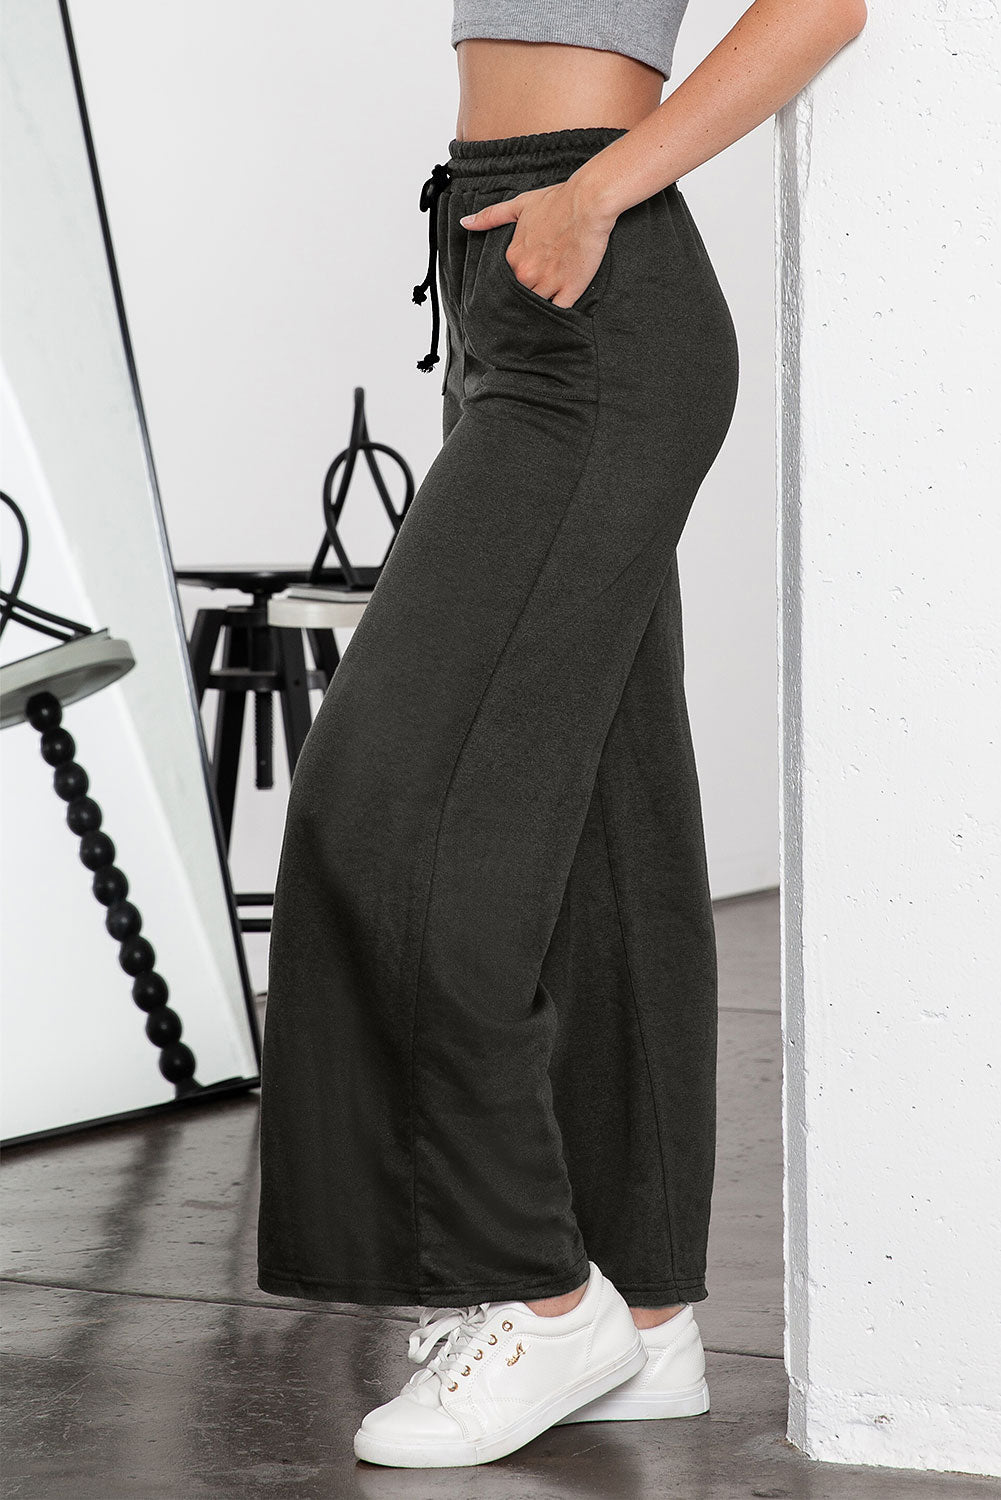 Grey Mineral Washed Drawstring High Waisted Wide Leg Pants